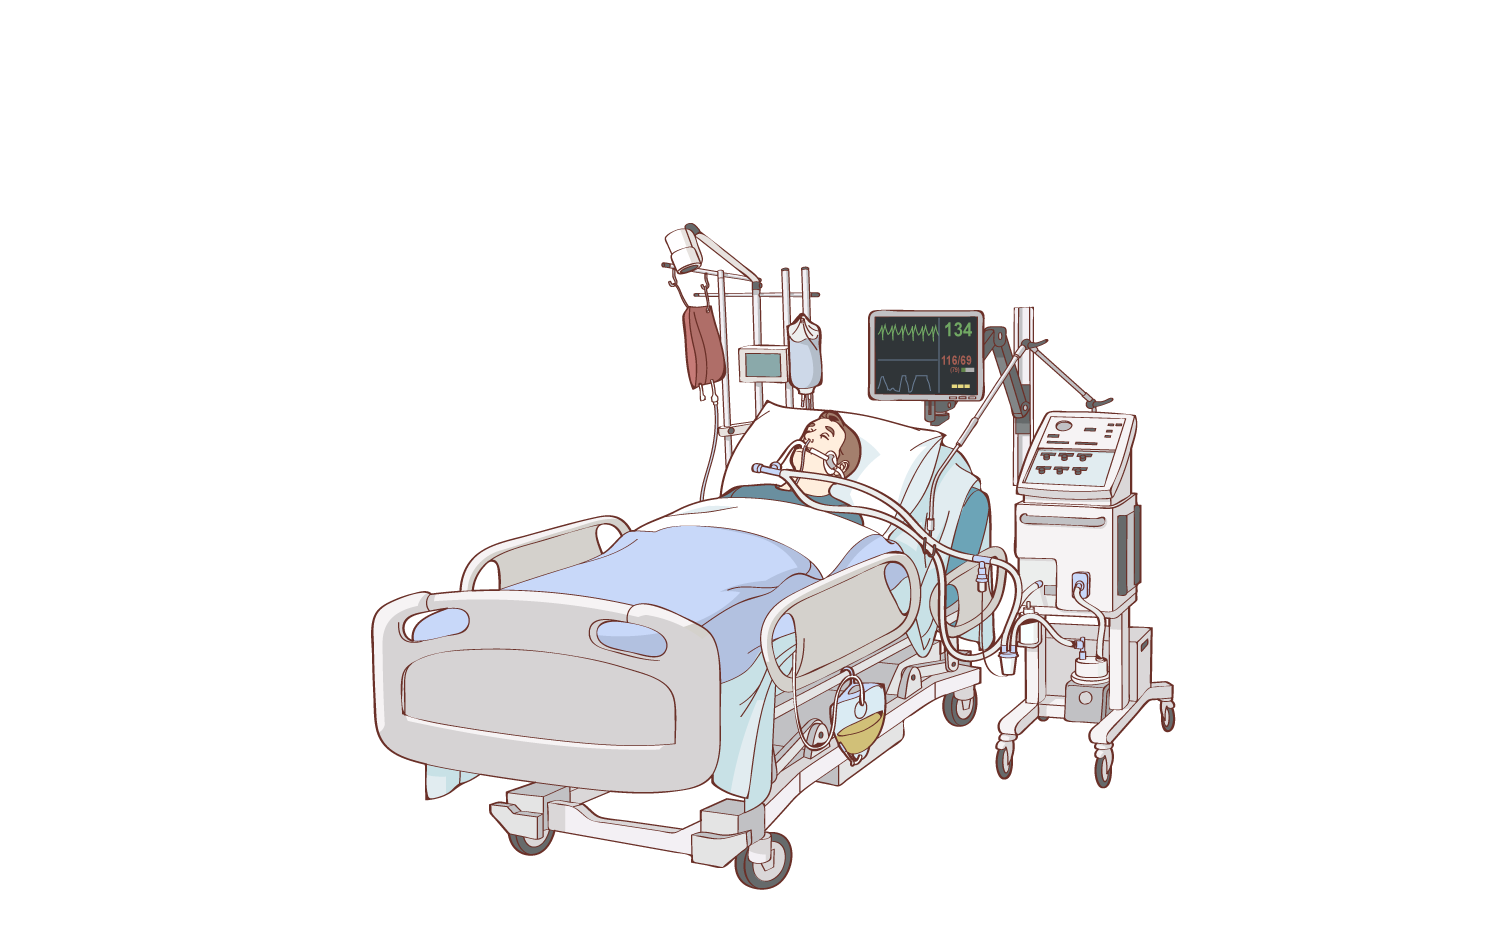 illustration of man in intensive care unit with ventilator, feeding tube, IV drip and urinary catheter